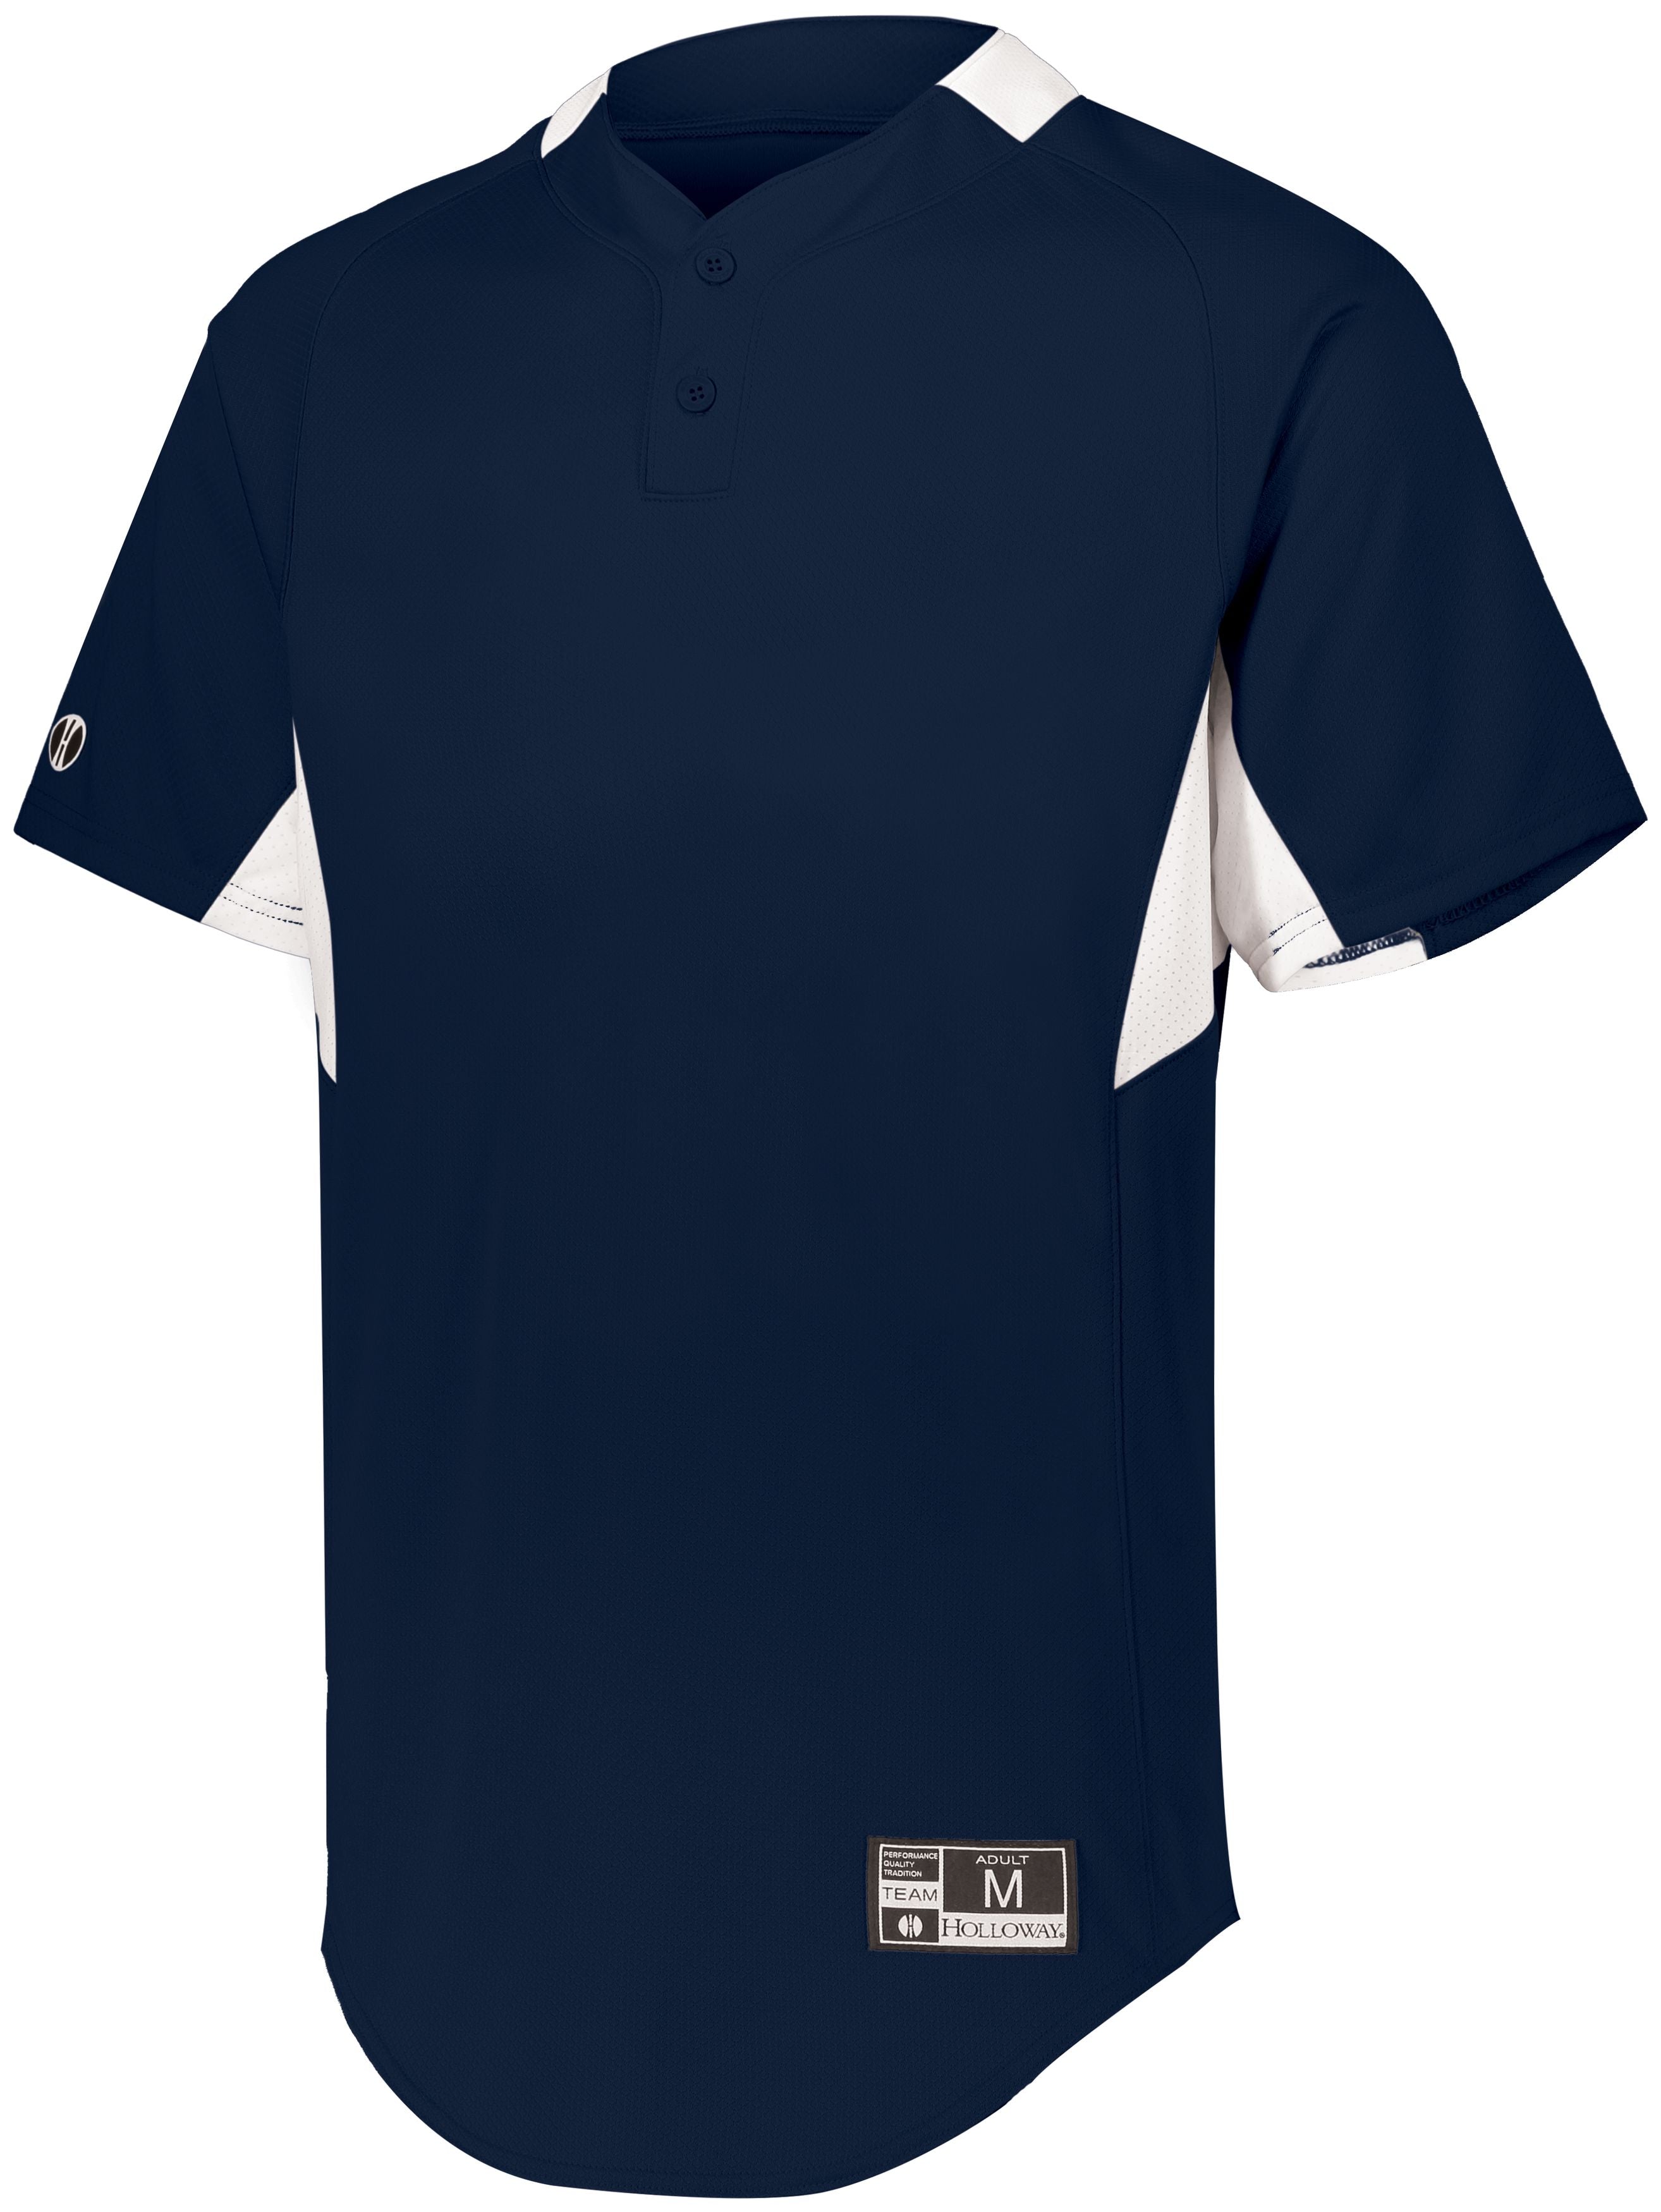 Holloway Youth  Game7 Two-Button Baseball Jersey in Navy/White  -Part of the Youth, Youth-Jersey, Baseball, Holloway, Shirts, All-Sports, All-Sports-1 product lines at KanaleyCreations.com